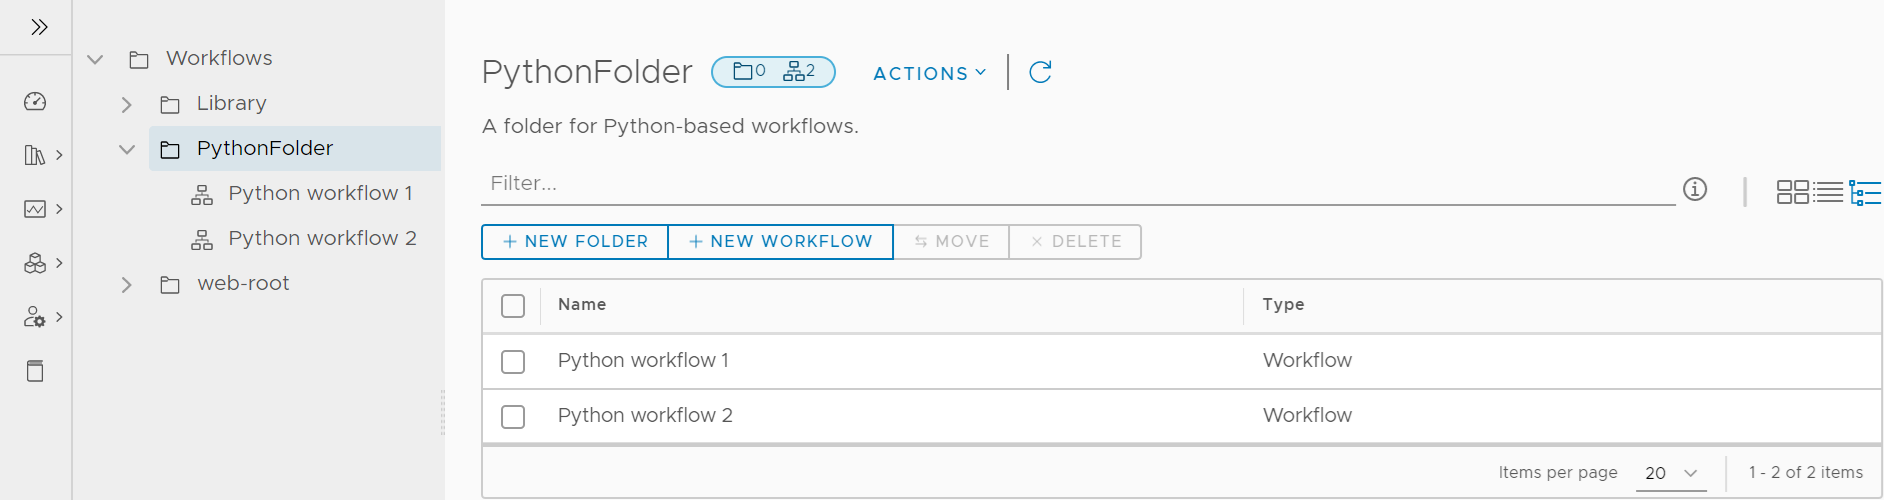 The vRealize Orchestrator Client displays the Workflows page in Tree View.